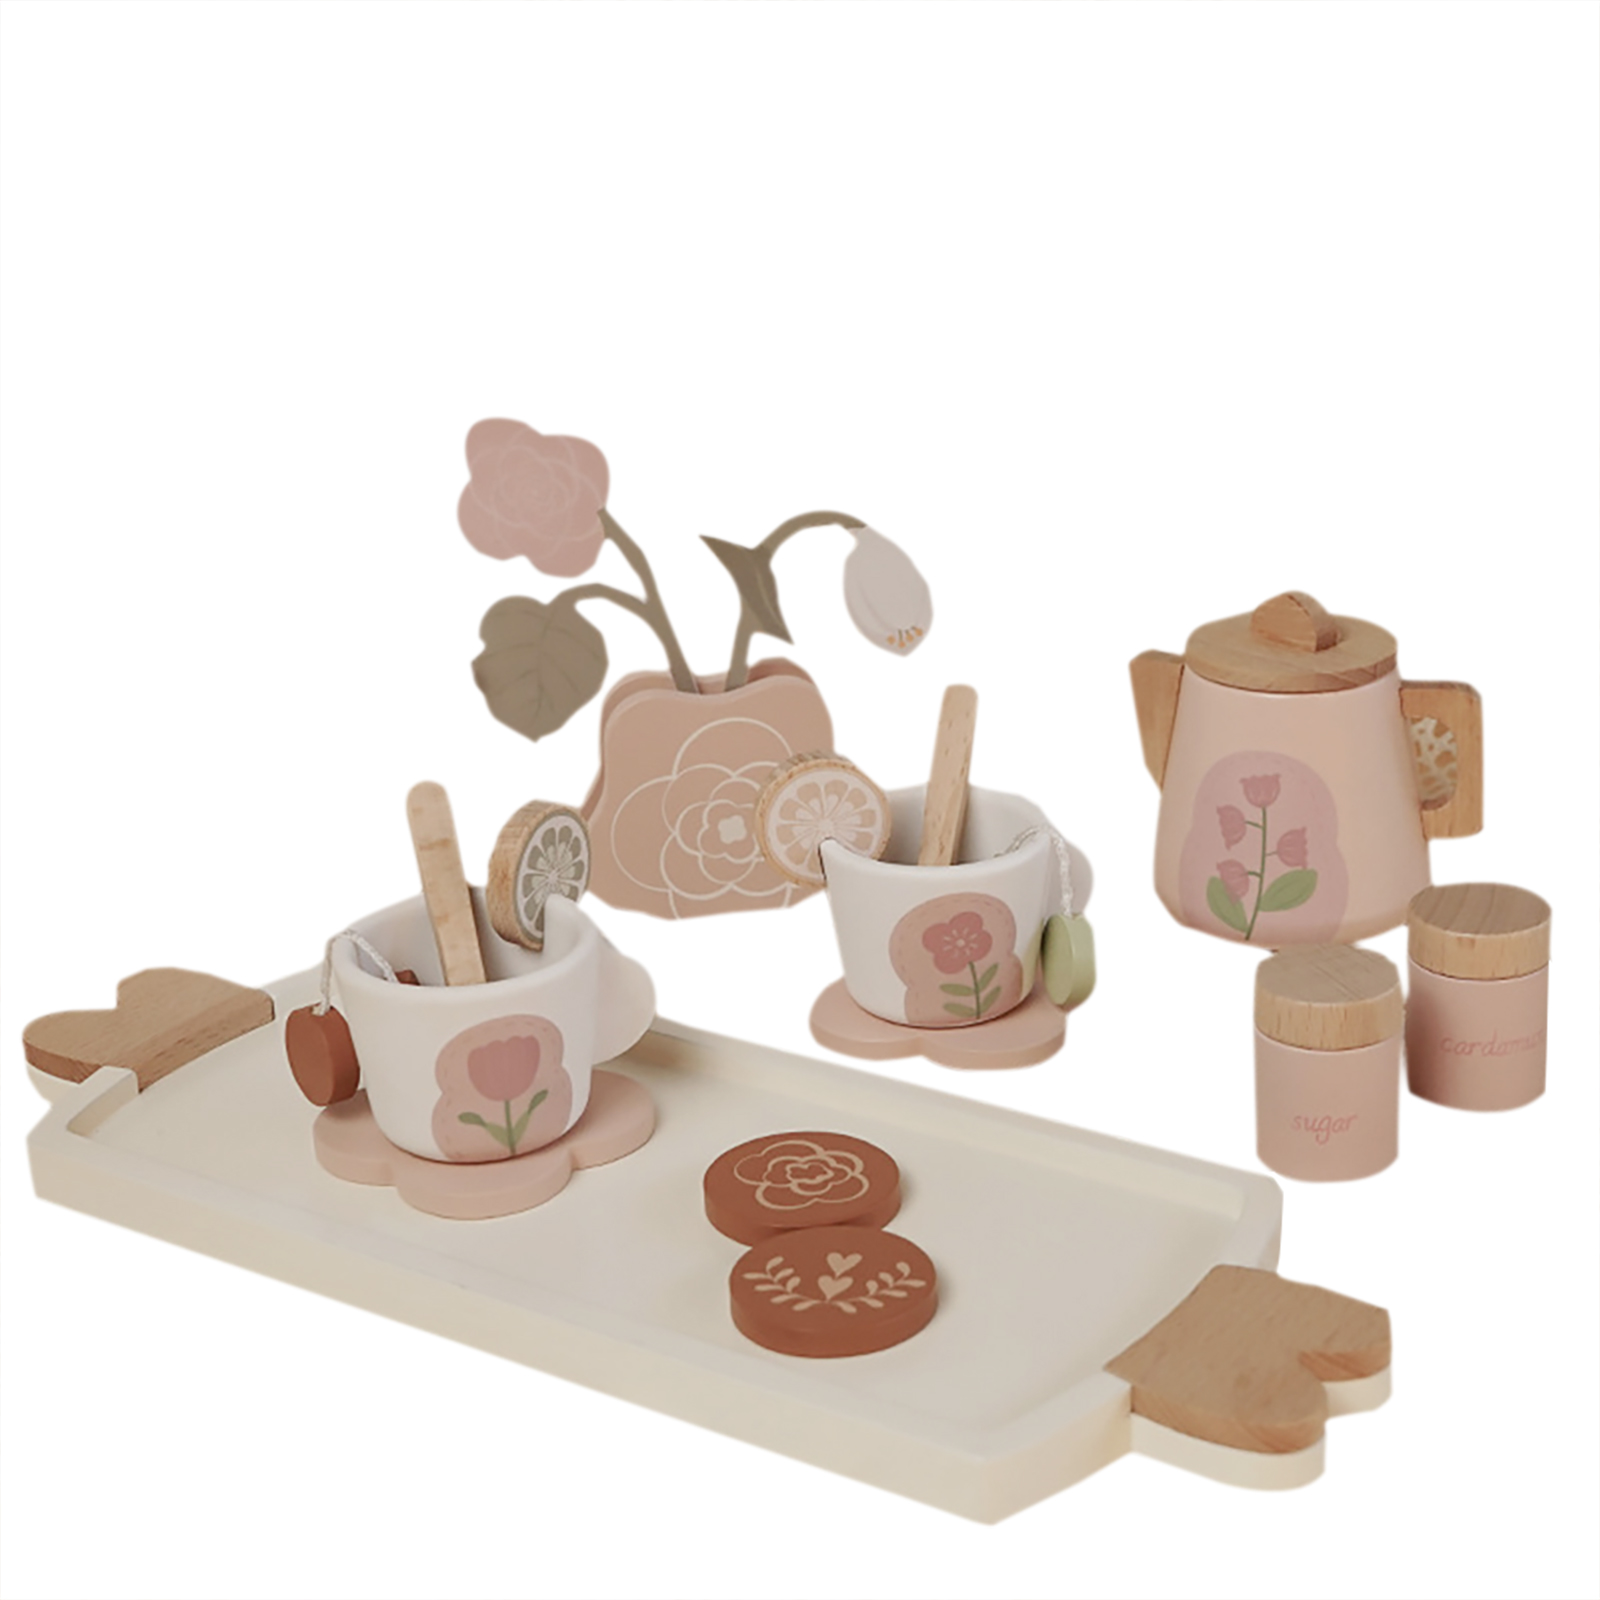 Wooden Tea Set For Girls Toddler Tea Set Toy Play Kitchen Pretend Playset Toys For Girls Birthday Gifts